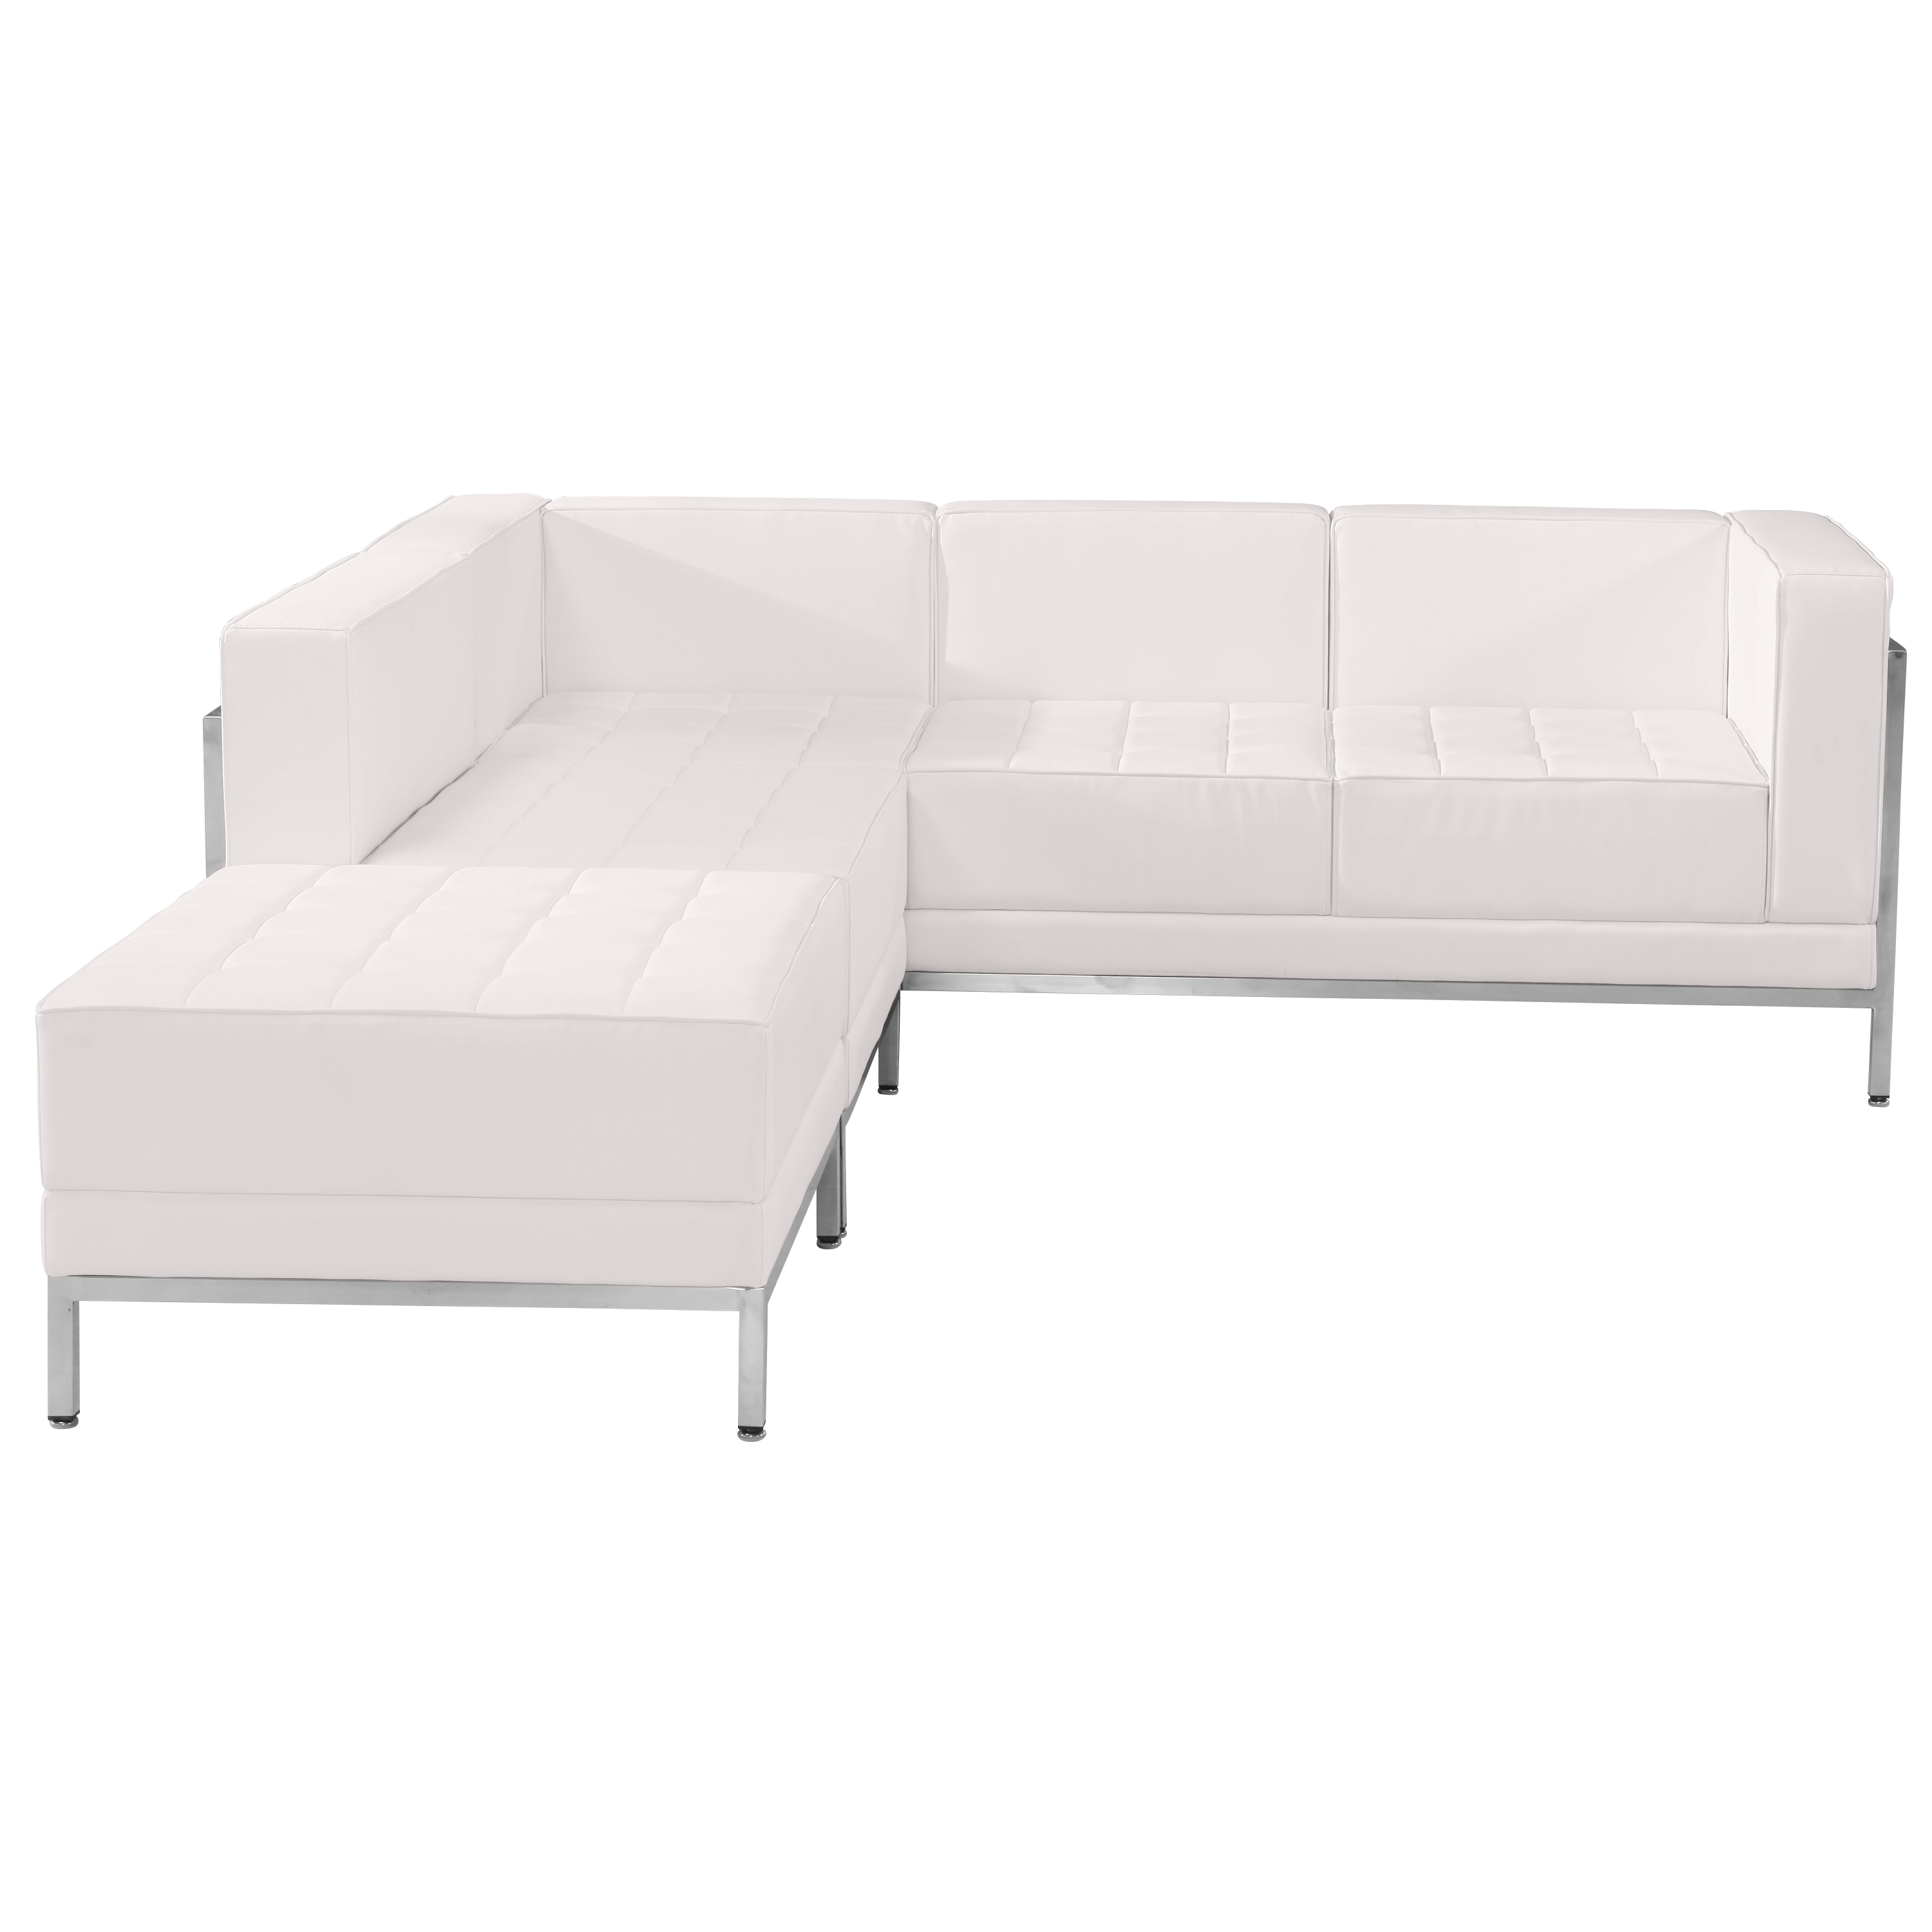 Flash Furniture ZB-IMAG-SECT-SET9-WH-GG Hercules Imagination Series White LeatherSoft Sectional Configuration, 3 Pieces